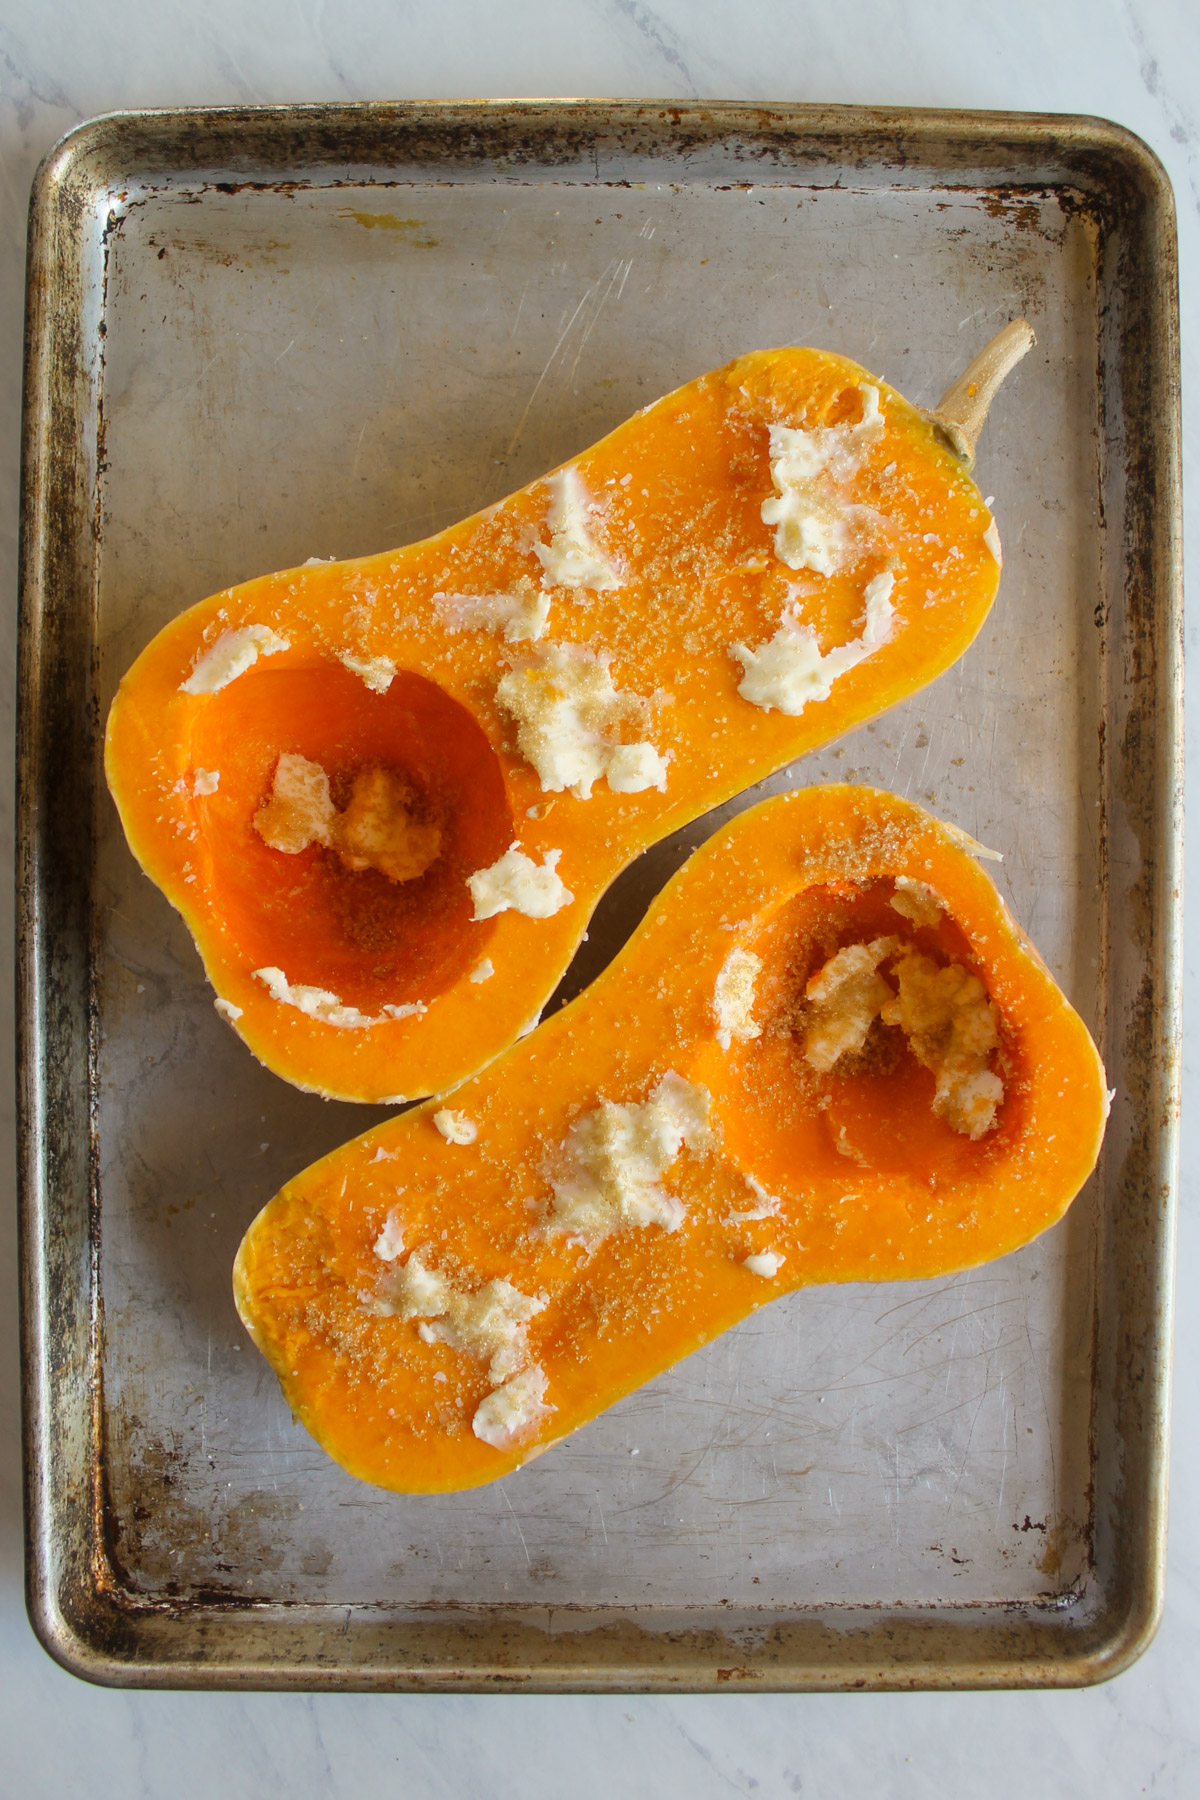 Butternut squash halves on a sheet pan smeared with butter, brown sugar and salt.